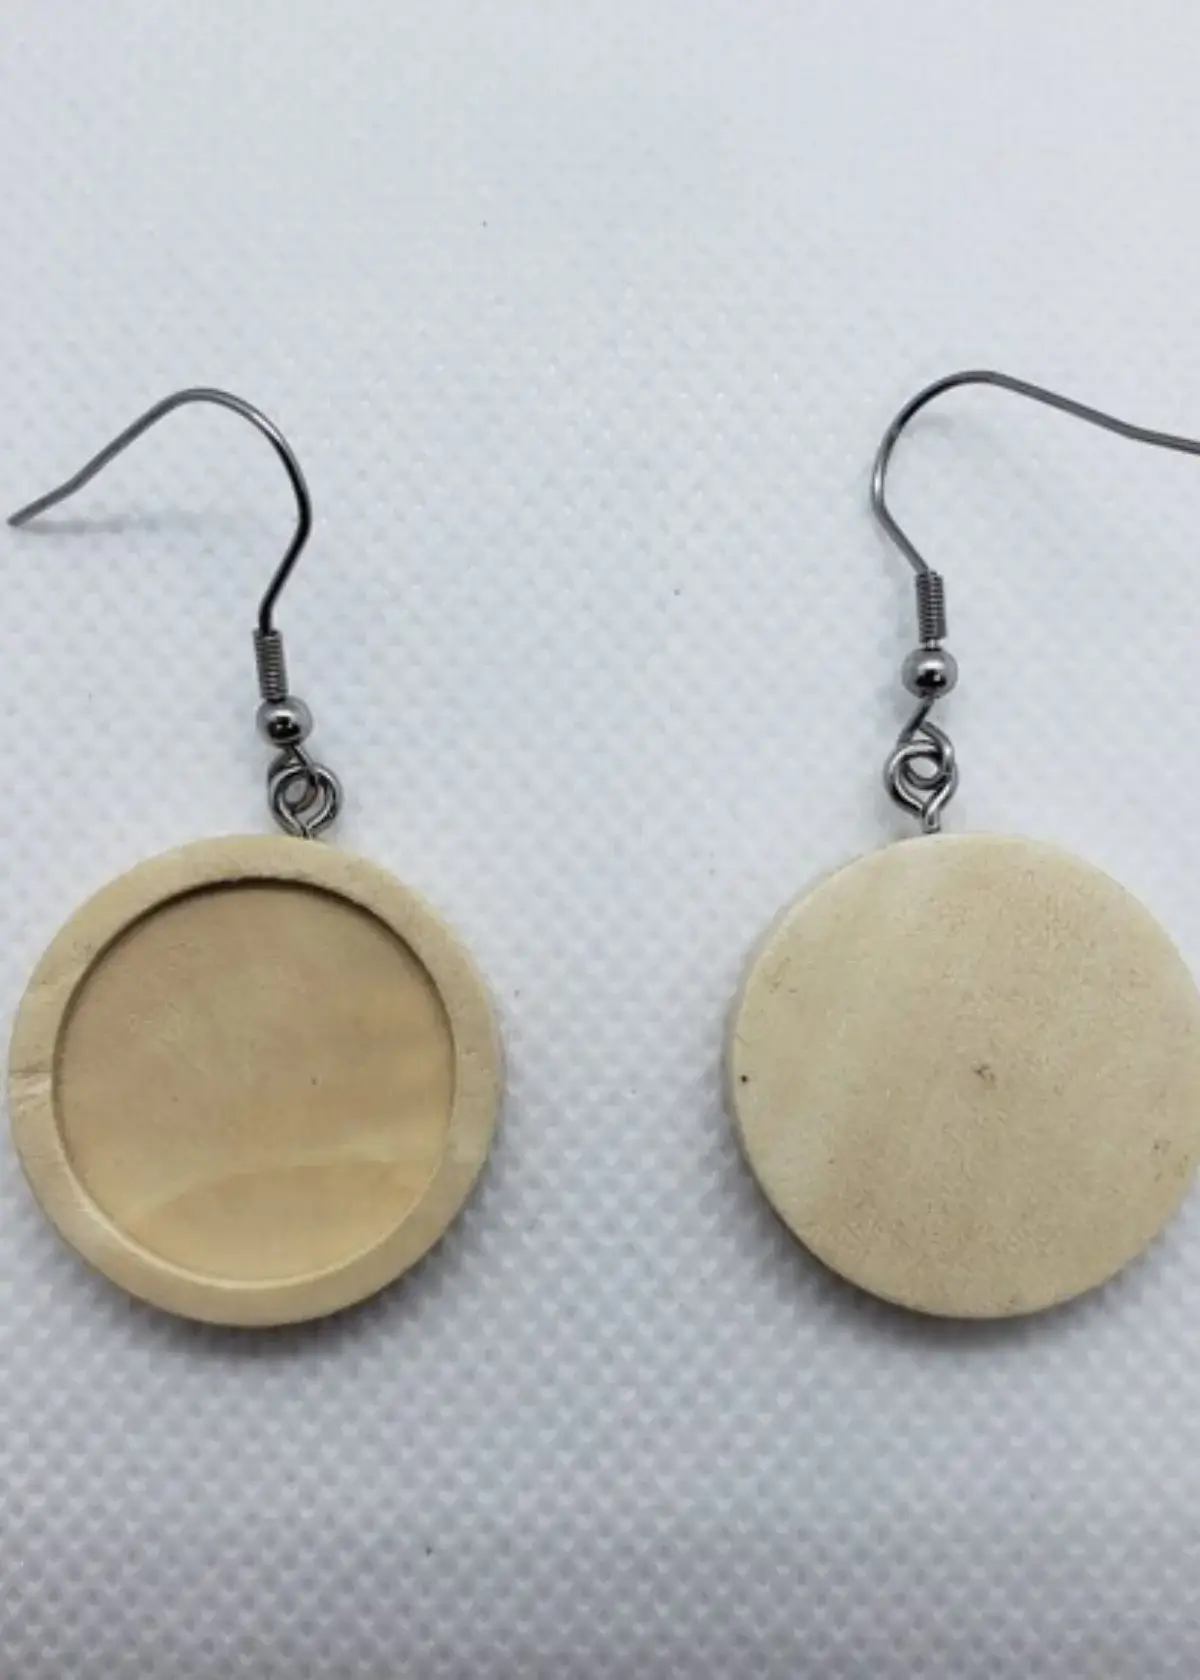 What types of wood are used for earring blanks?